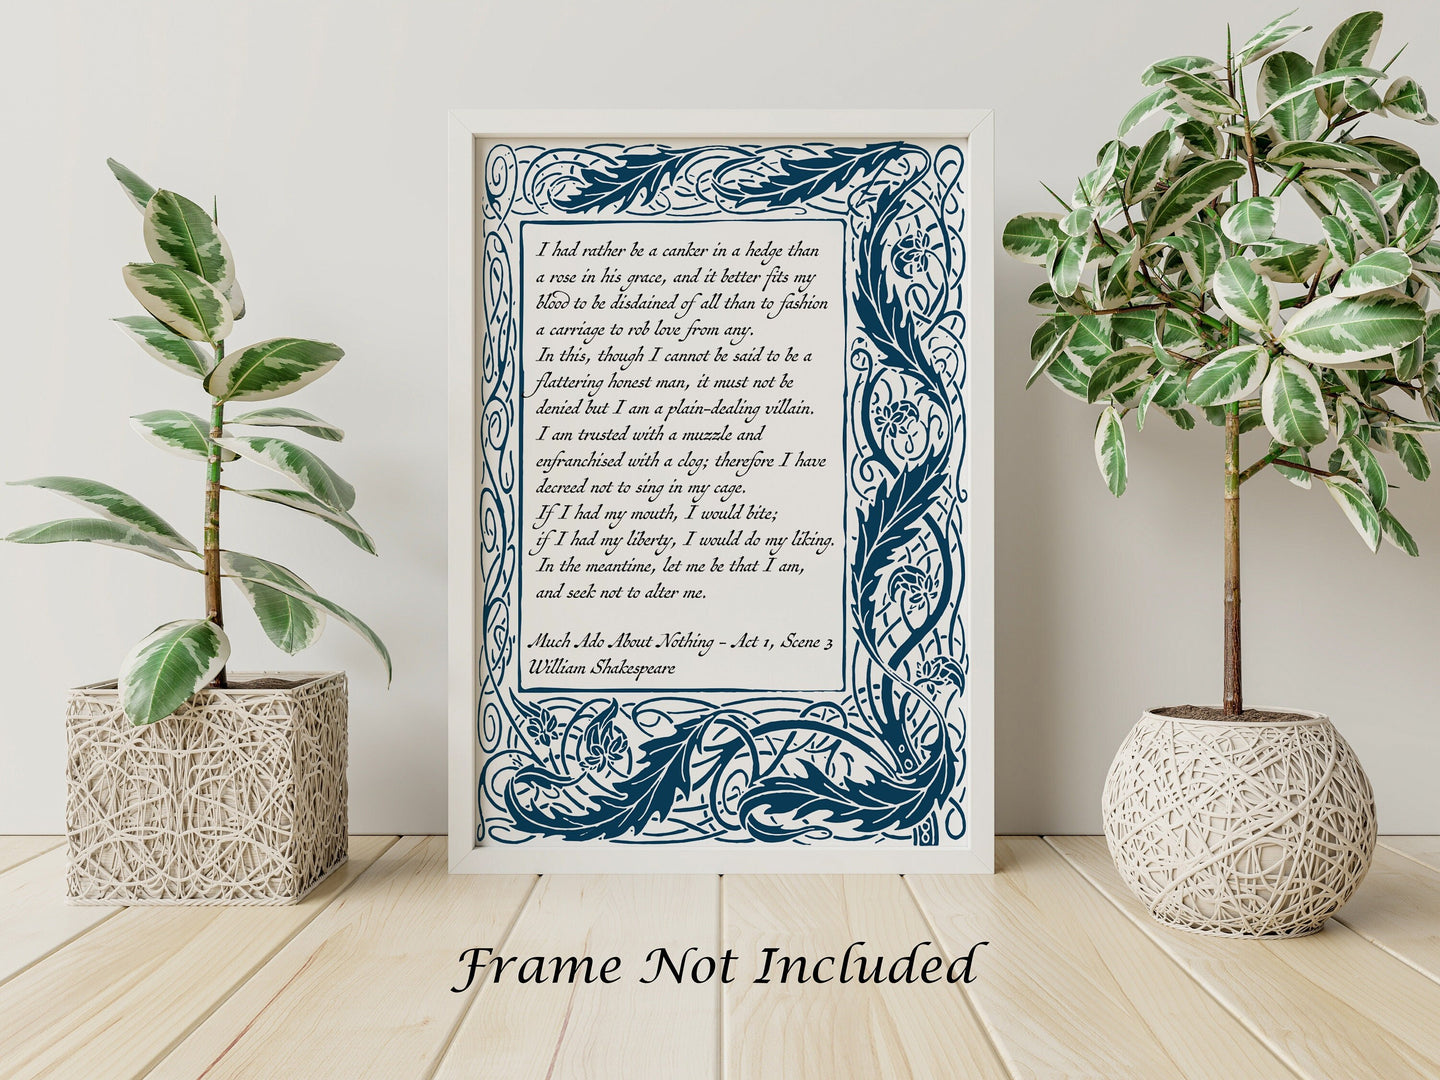 Shakespeare Quote Print Let me be that I am and seek not to alter me - Much Ado About Nothing Poster Print - Physical Print Without Frame